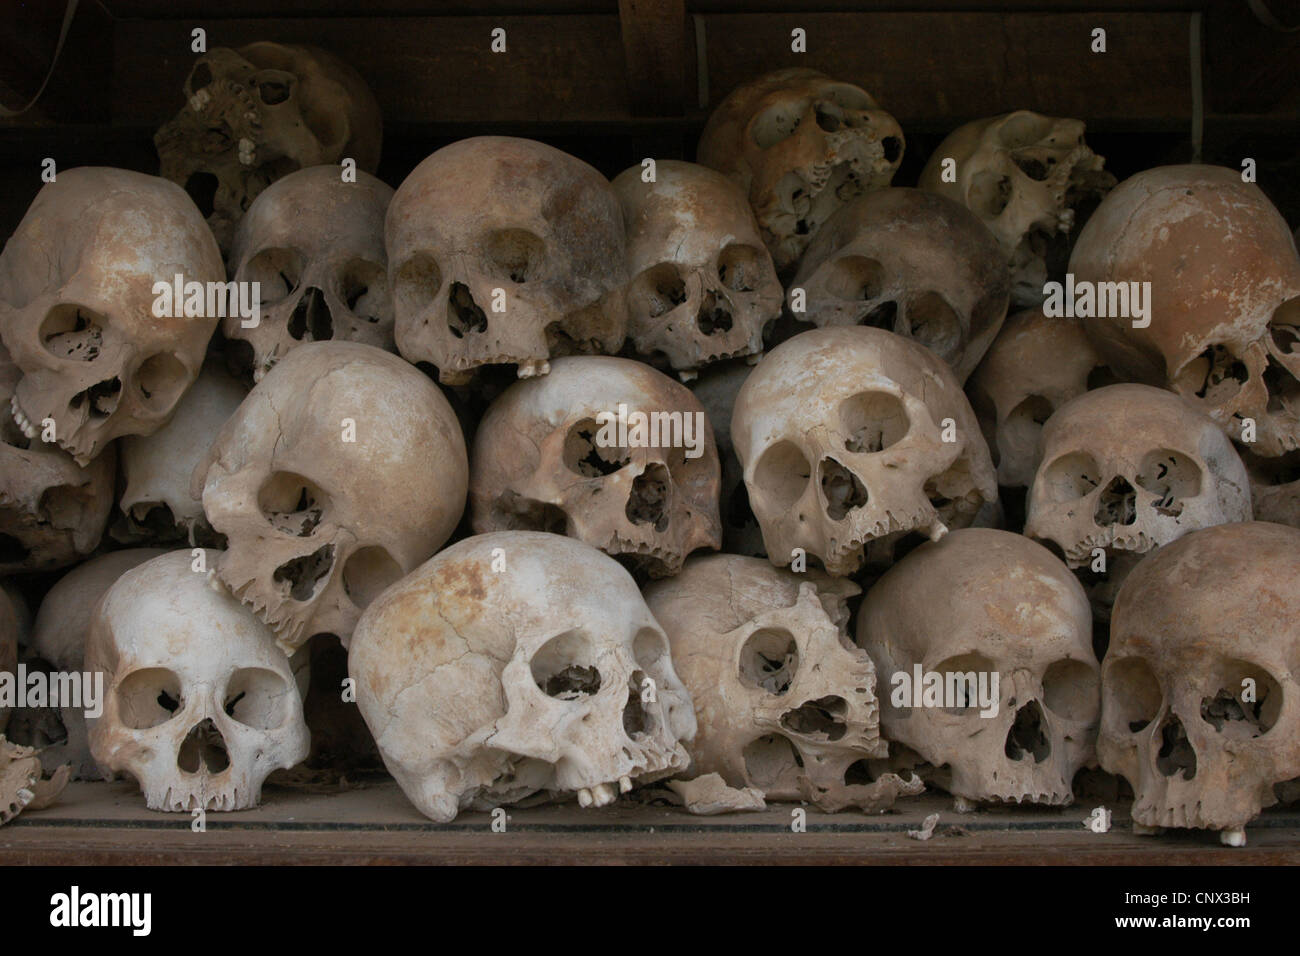 Human skulls of Khmer Rouge regime's victims at the Killing Fields in Choeung Ek near Phnom Penh, Cambodia. Stock Photo